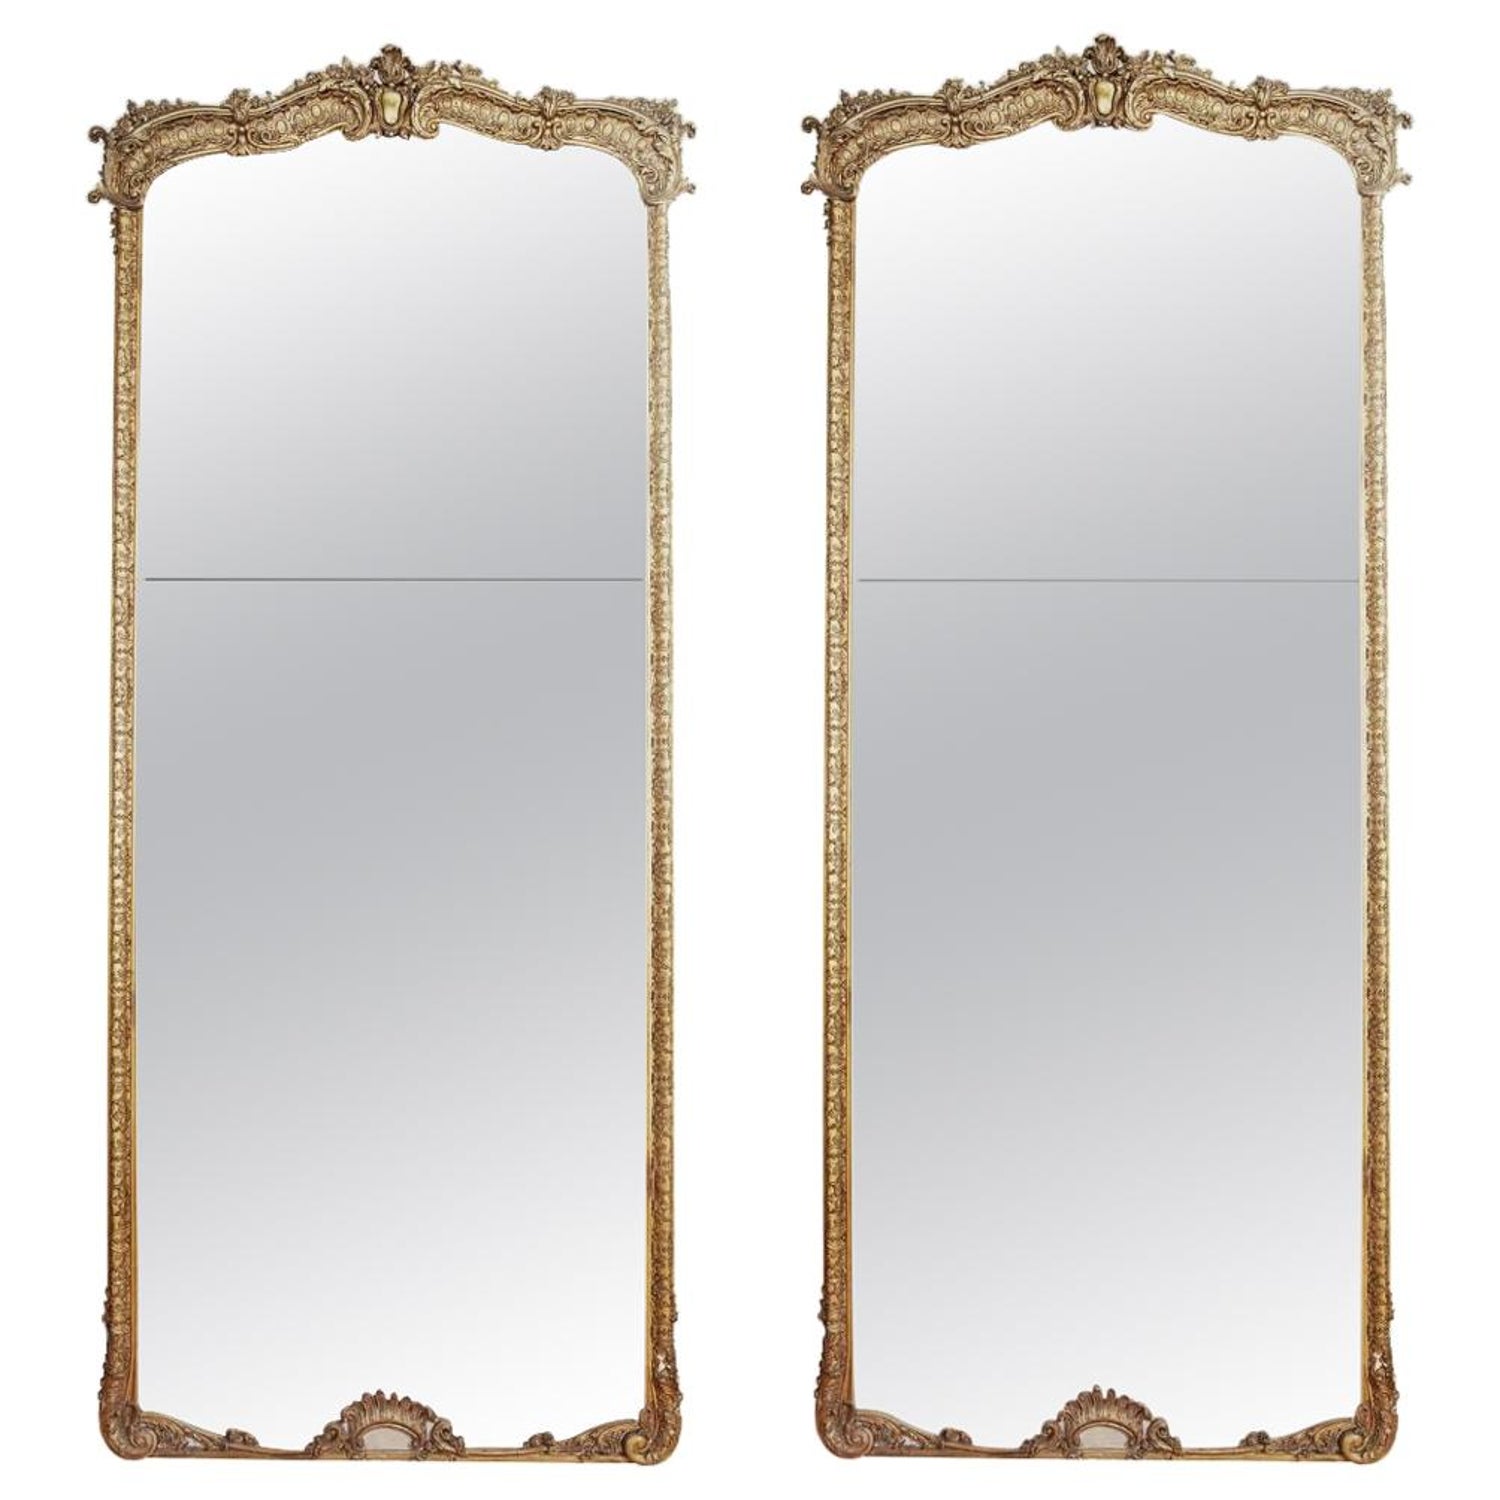 Pair Of Tall Full Length French Louis, Antique Gold Ornate Traditional Full Length Mirror